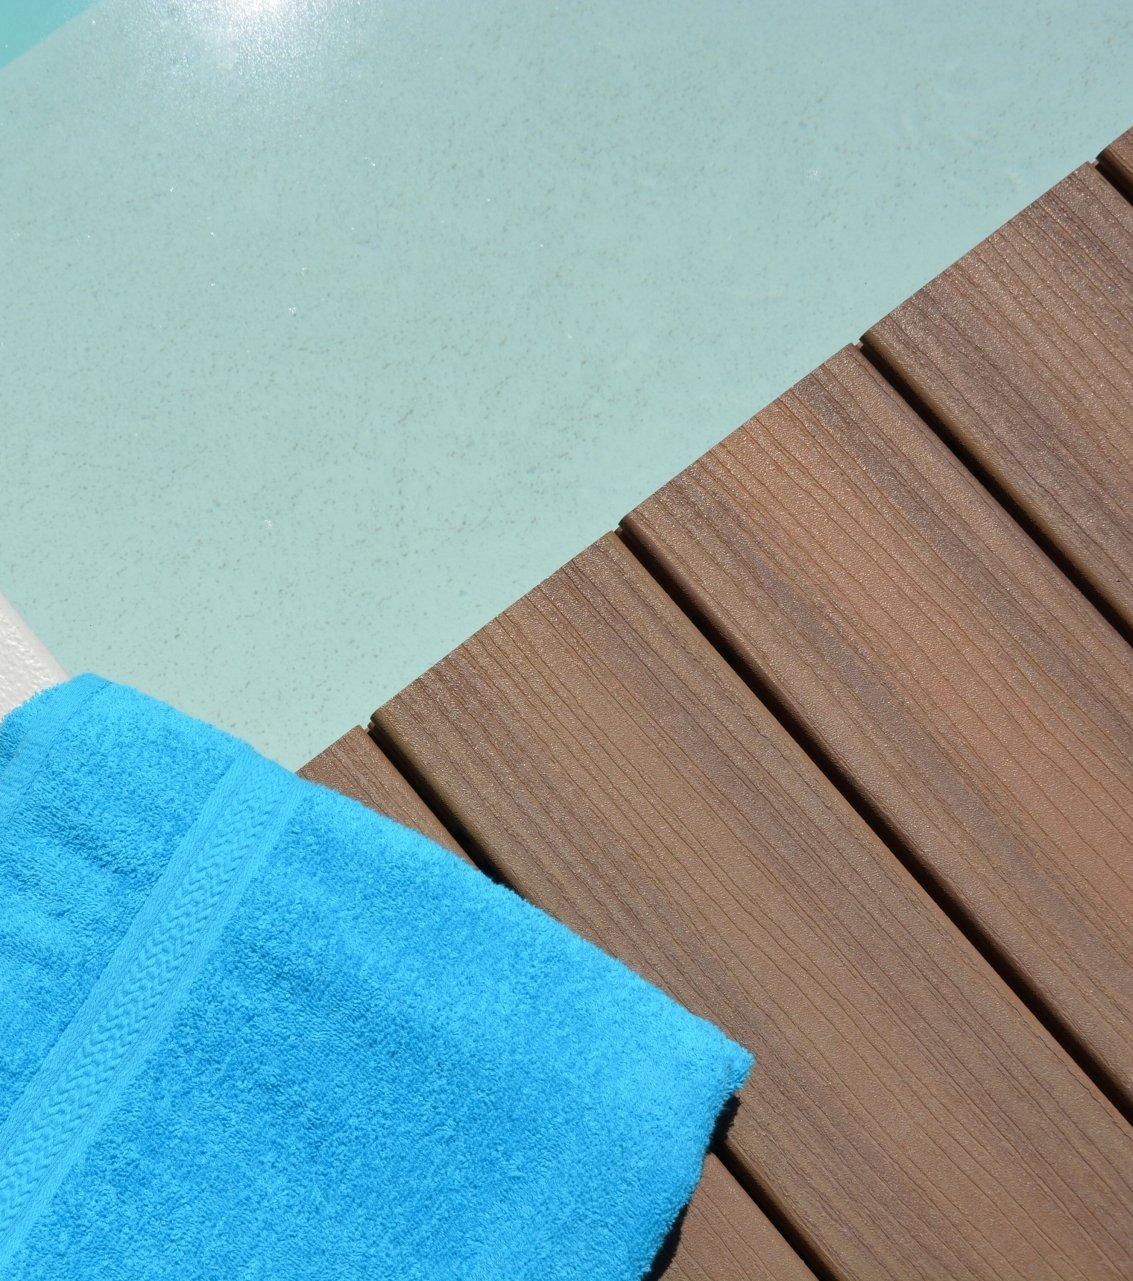 a towel by the edge of a wooden pool